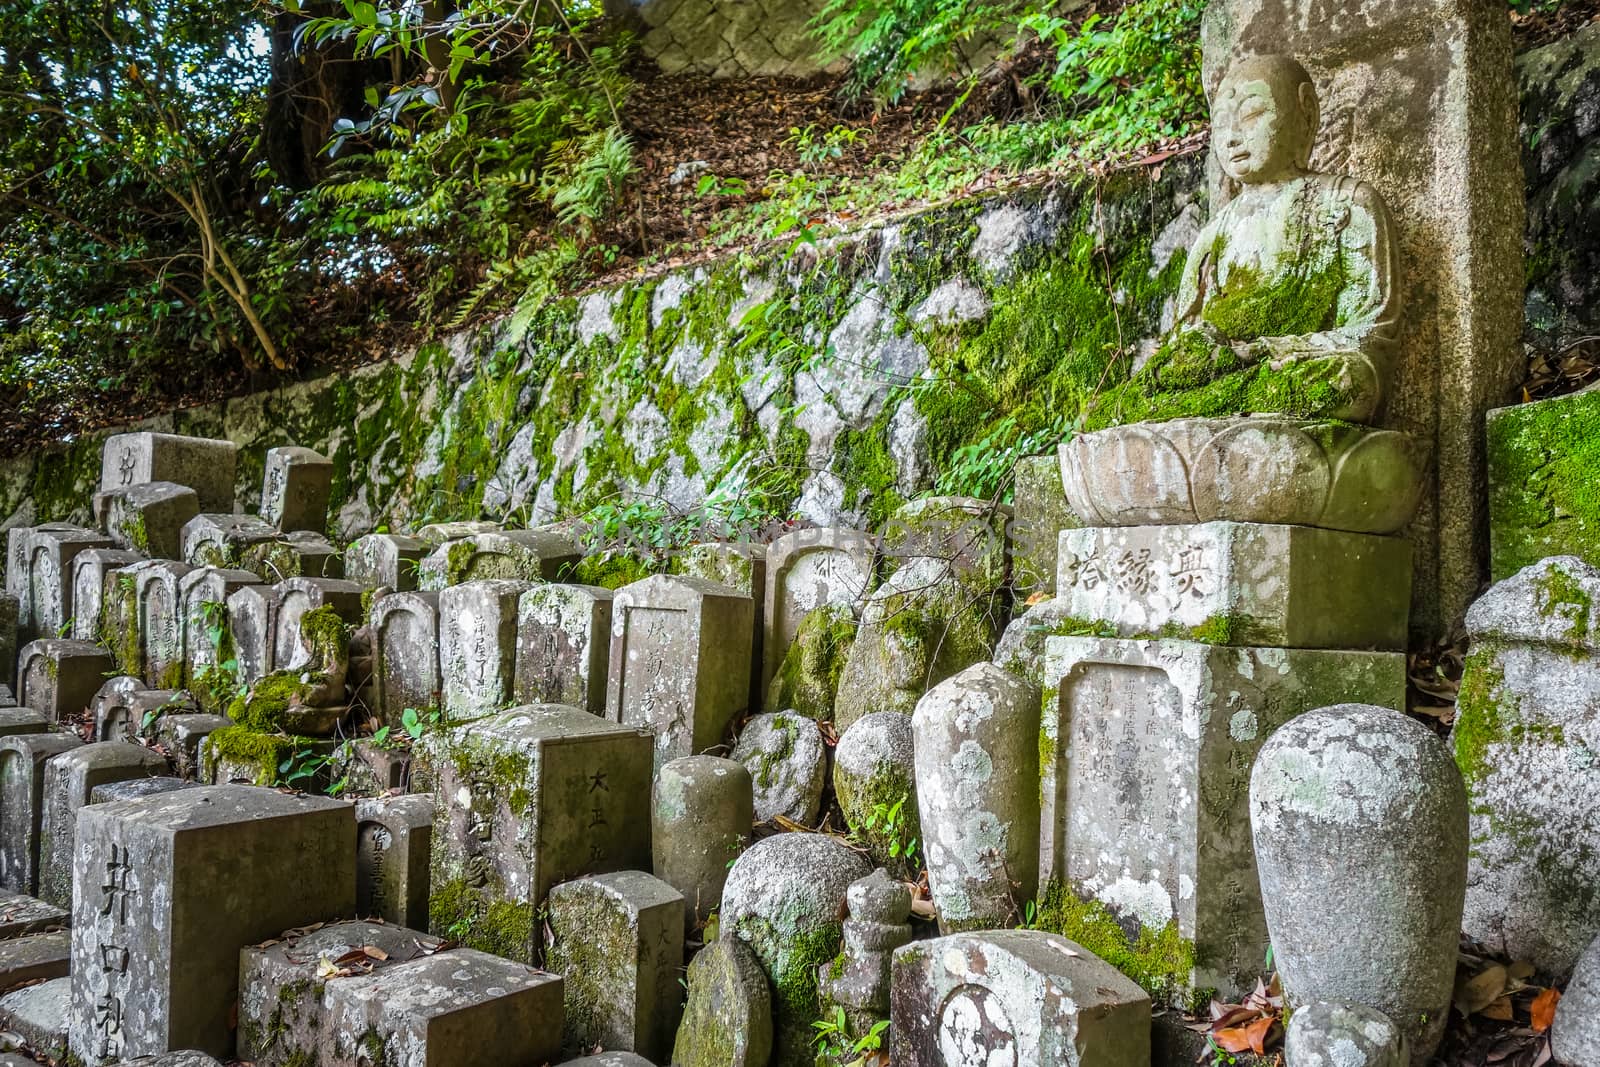 Chion-in temple garden graveyard, Kyoto, Japan by daboost